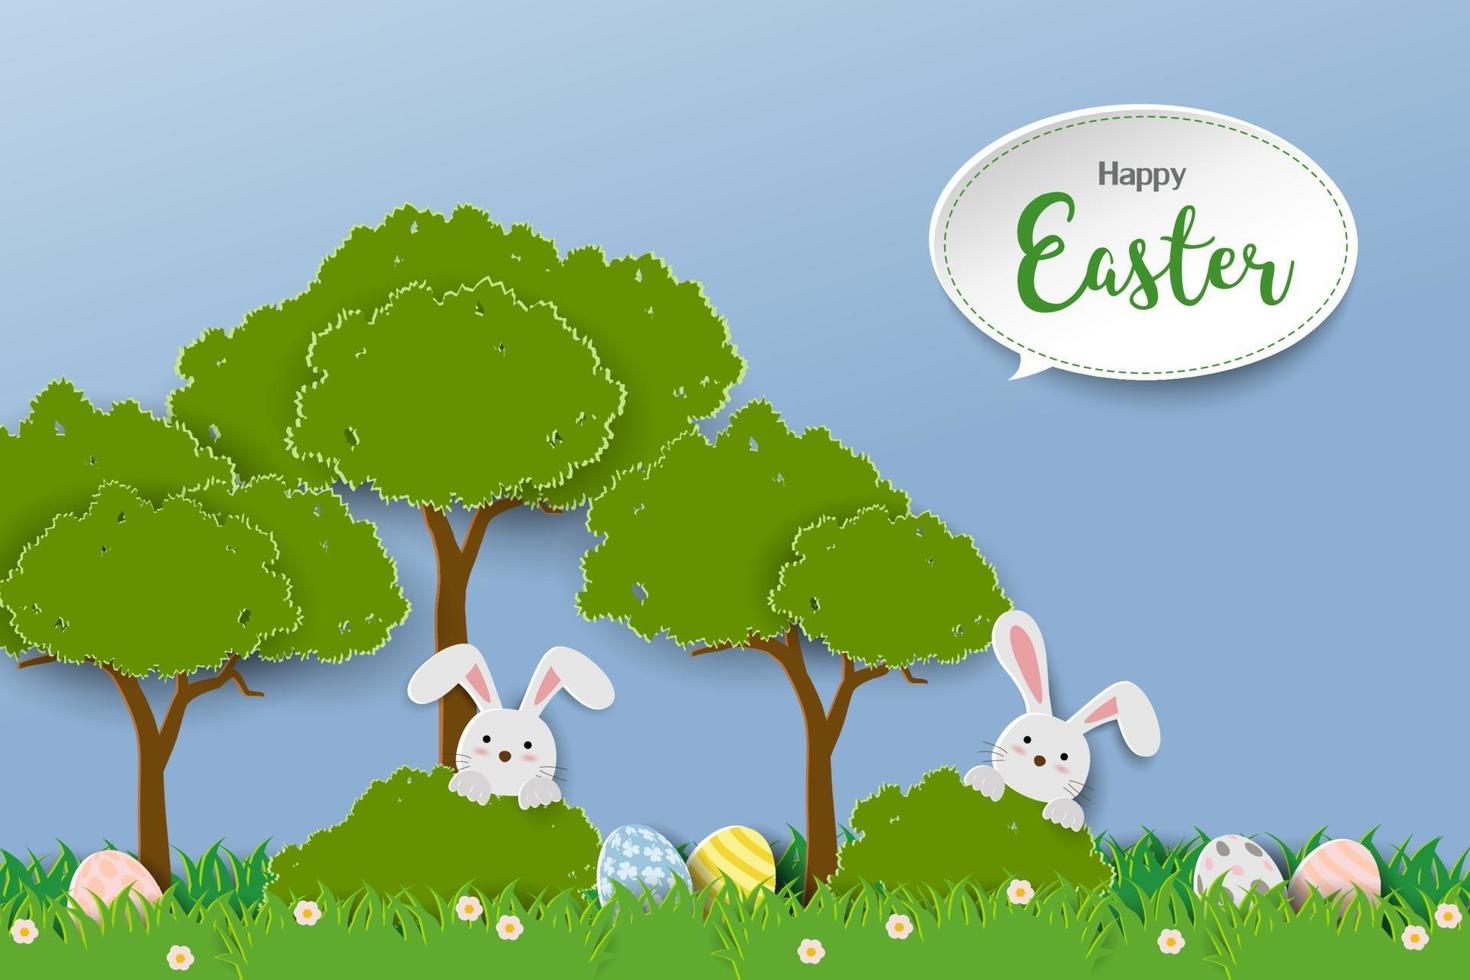 Happy Easter greeting card with rabbits hiding in grass on paper cut style vector